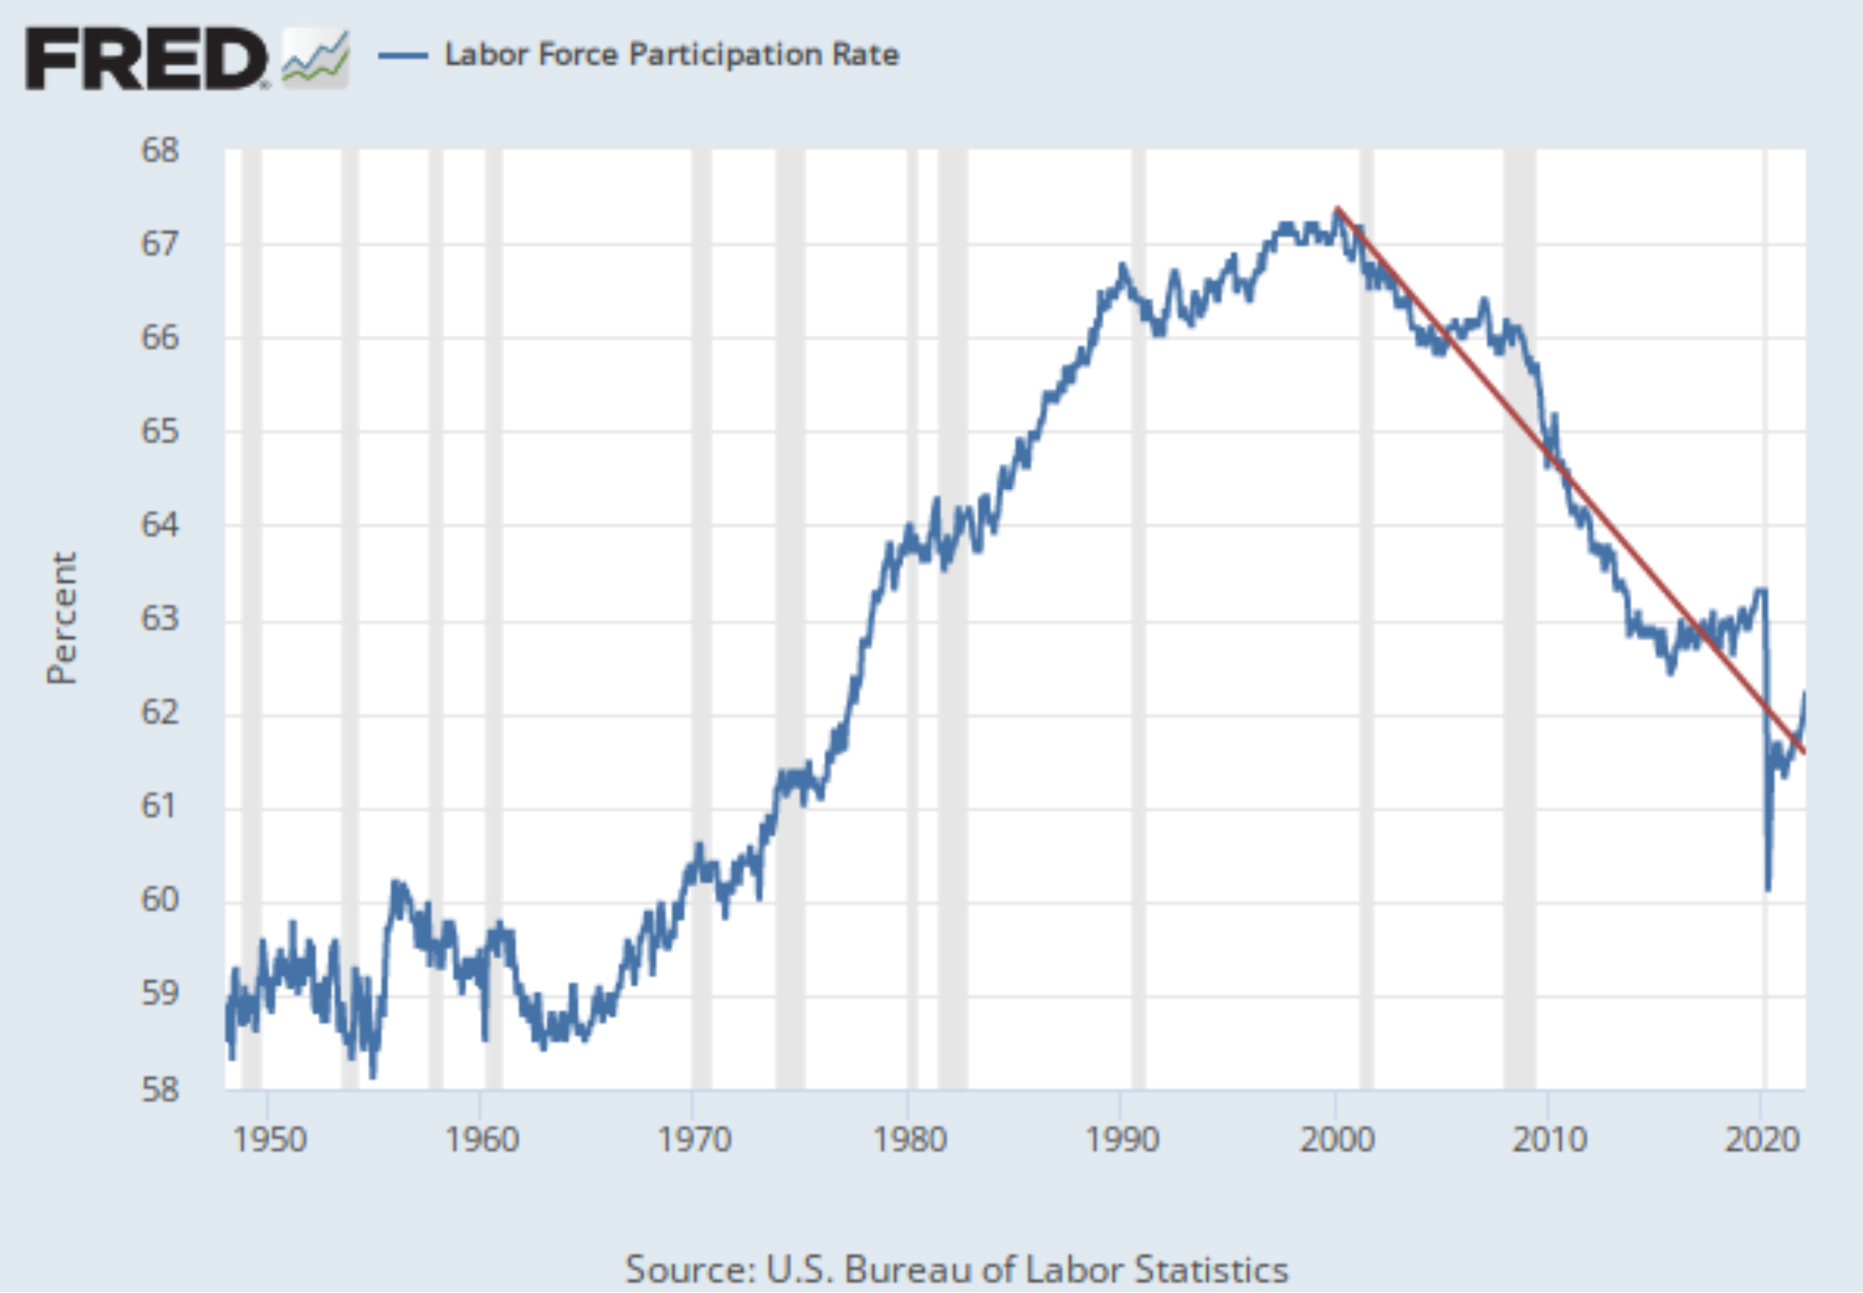 United States Labor Force Participation Rate Chart